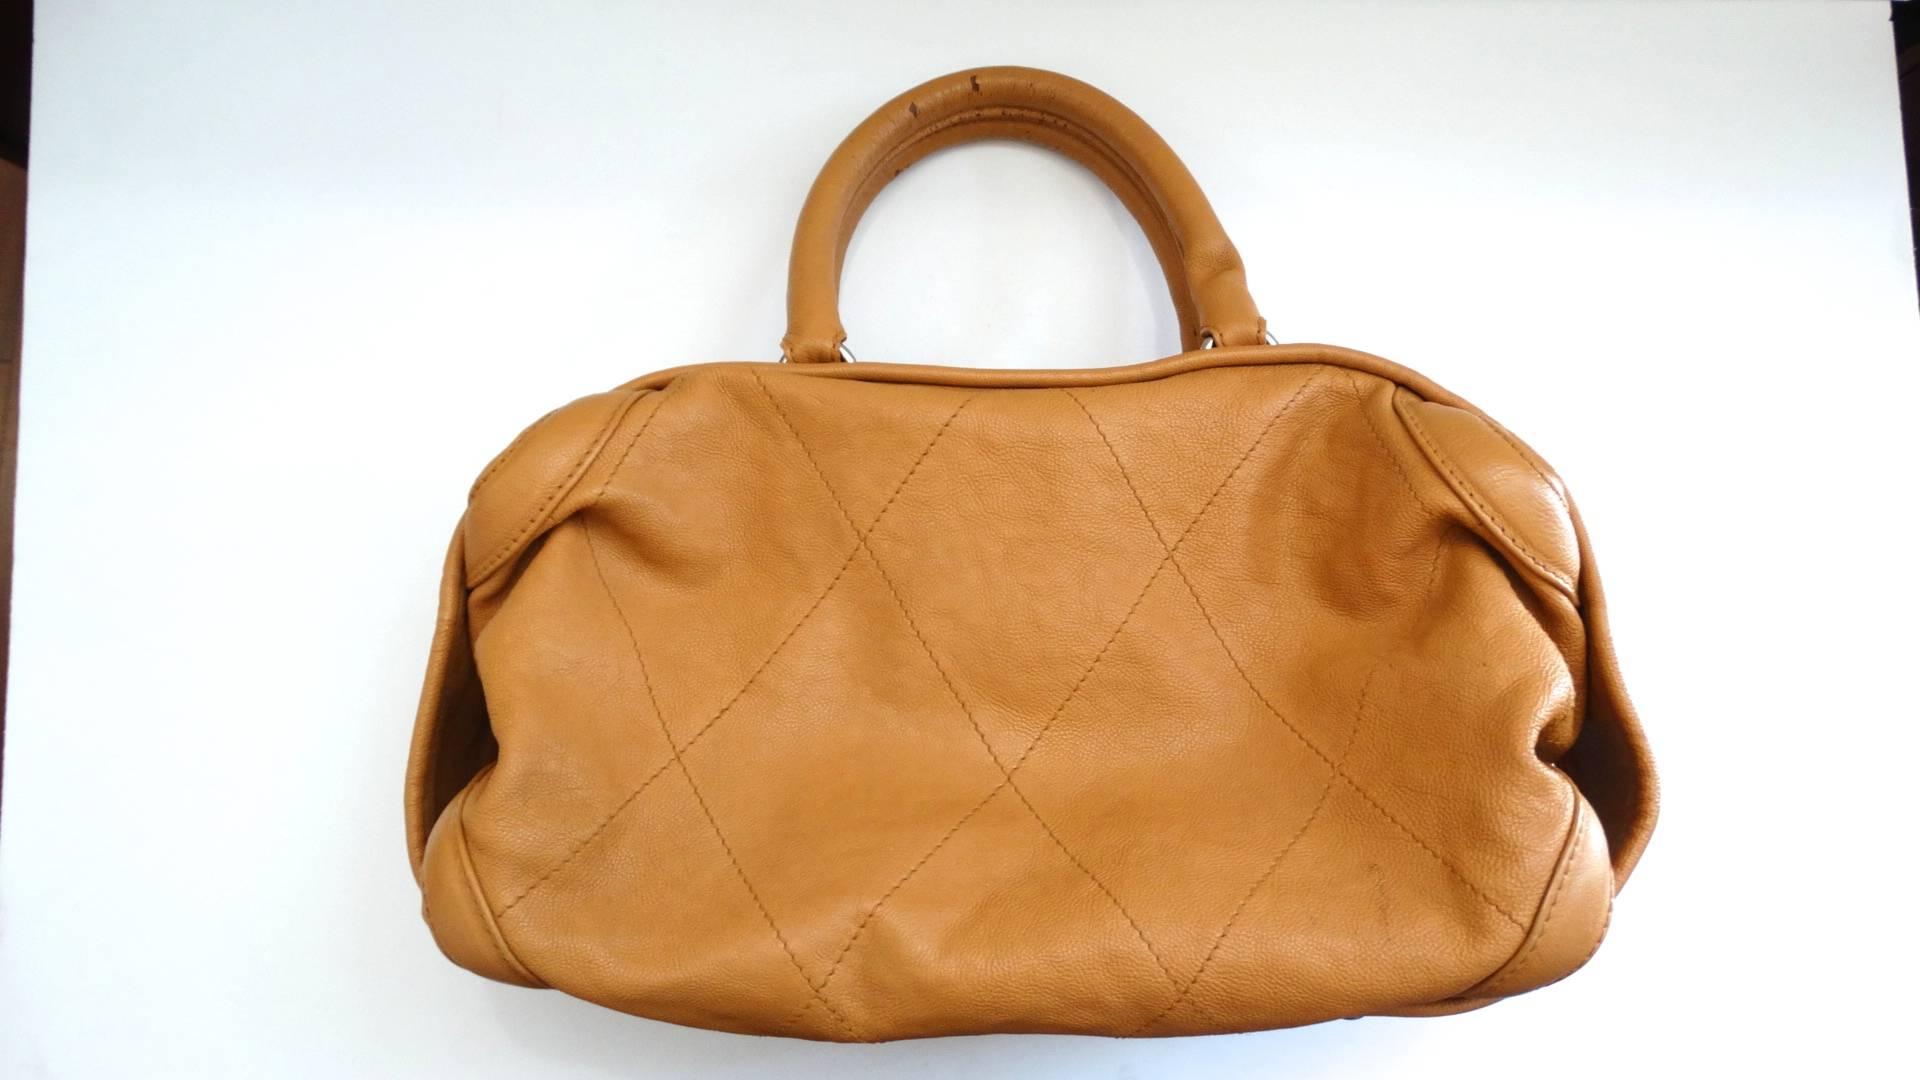 The most adorable tan top handle bag from 2000s Chanel! Made of a soft tan leather with detailed quilted stitching. Slouchy, hobo style silhouette with top handle construction. Silver metal zipper across the top with large Chanel CC medallion zipper